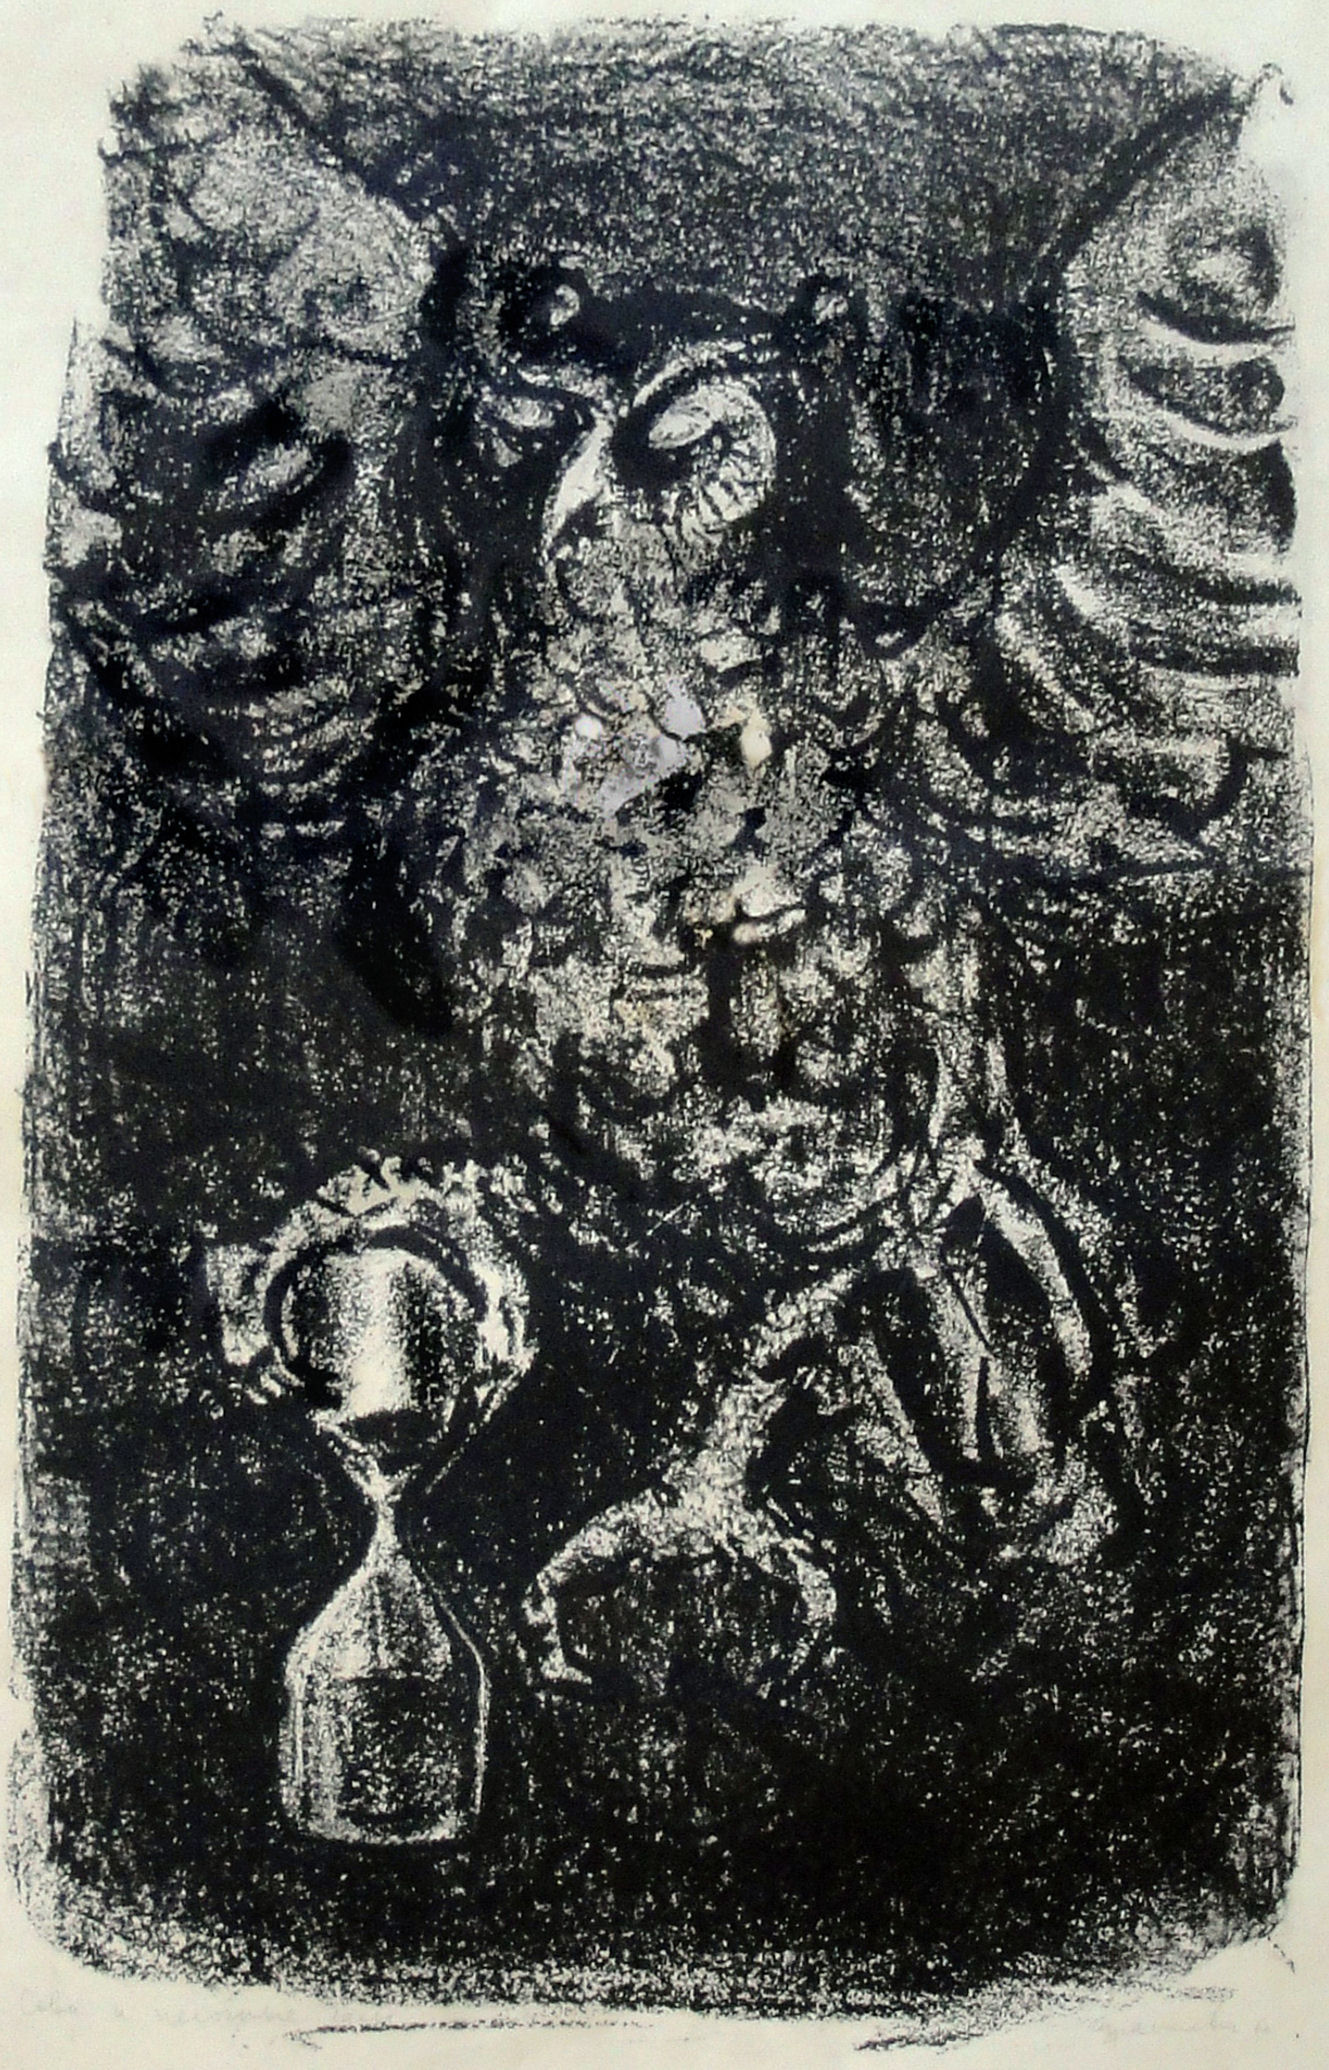 Gregory Israelevich (Russian,1924-1999), Owl and Hourglass, 1960, lithograph, 24 3/8 x 19 ¼ in., The Art Collection at The Hebrew Home at Riverdale